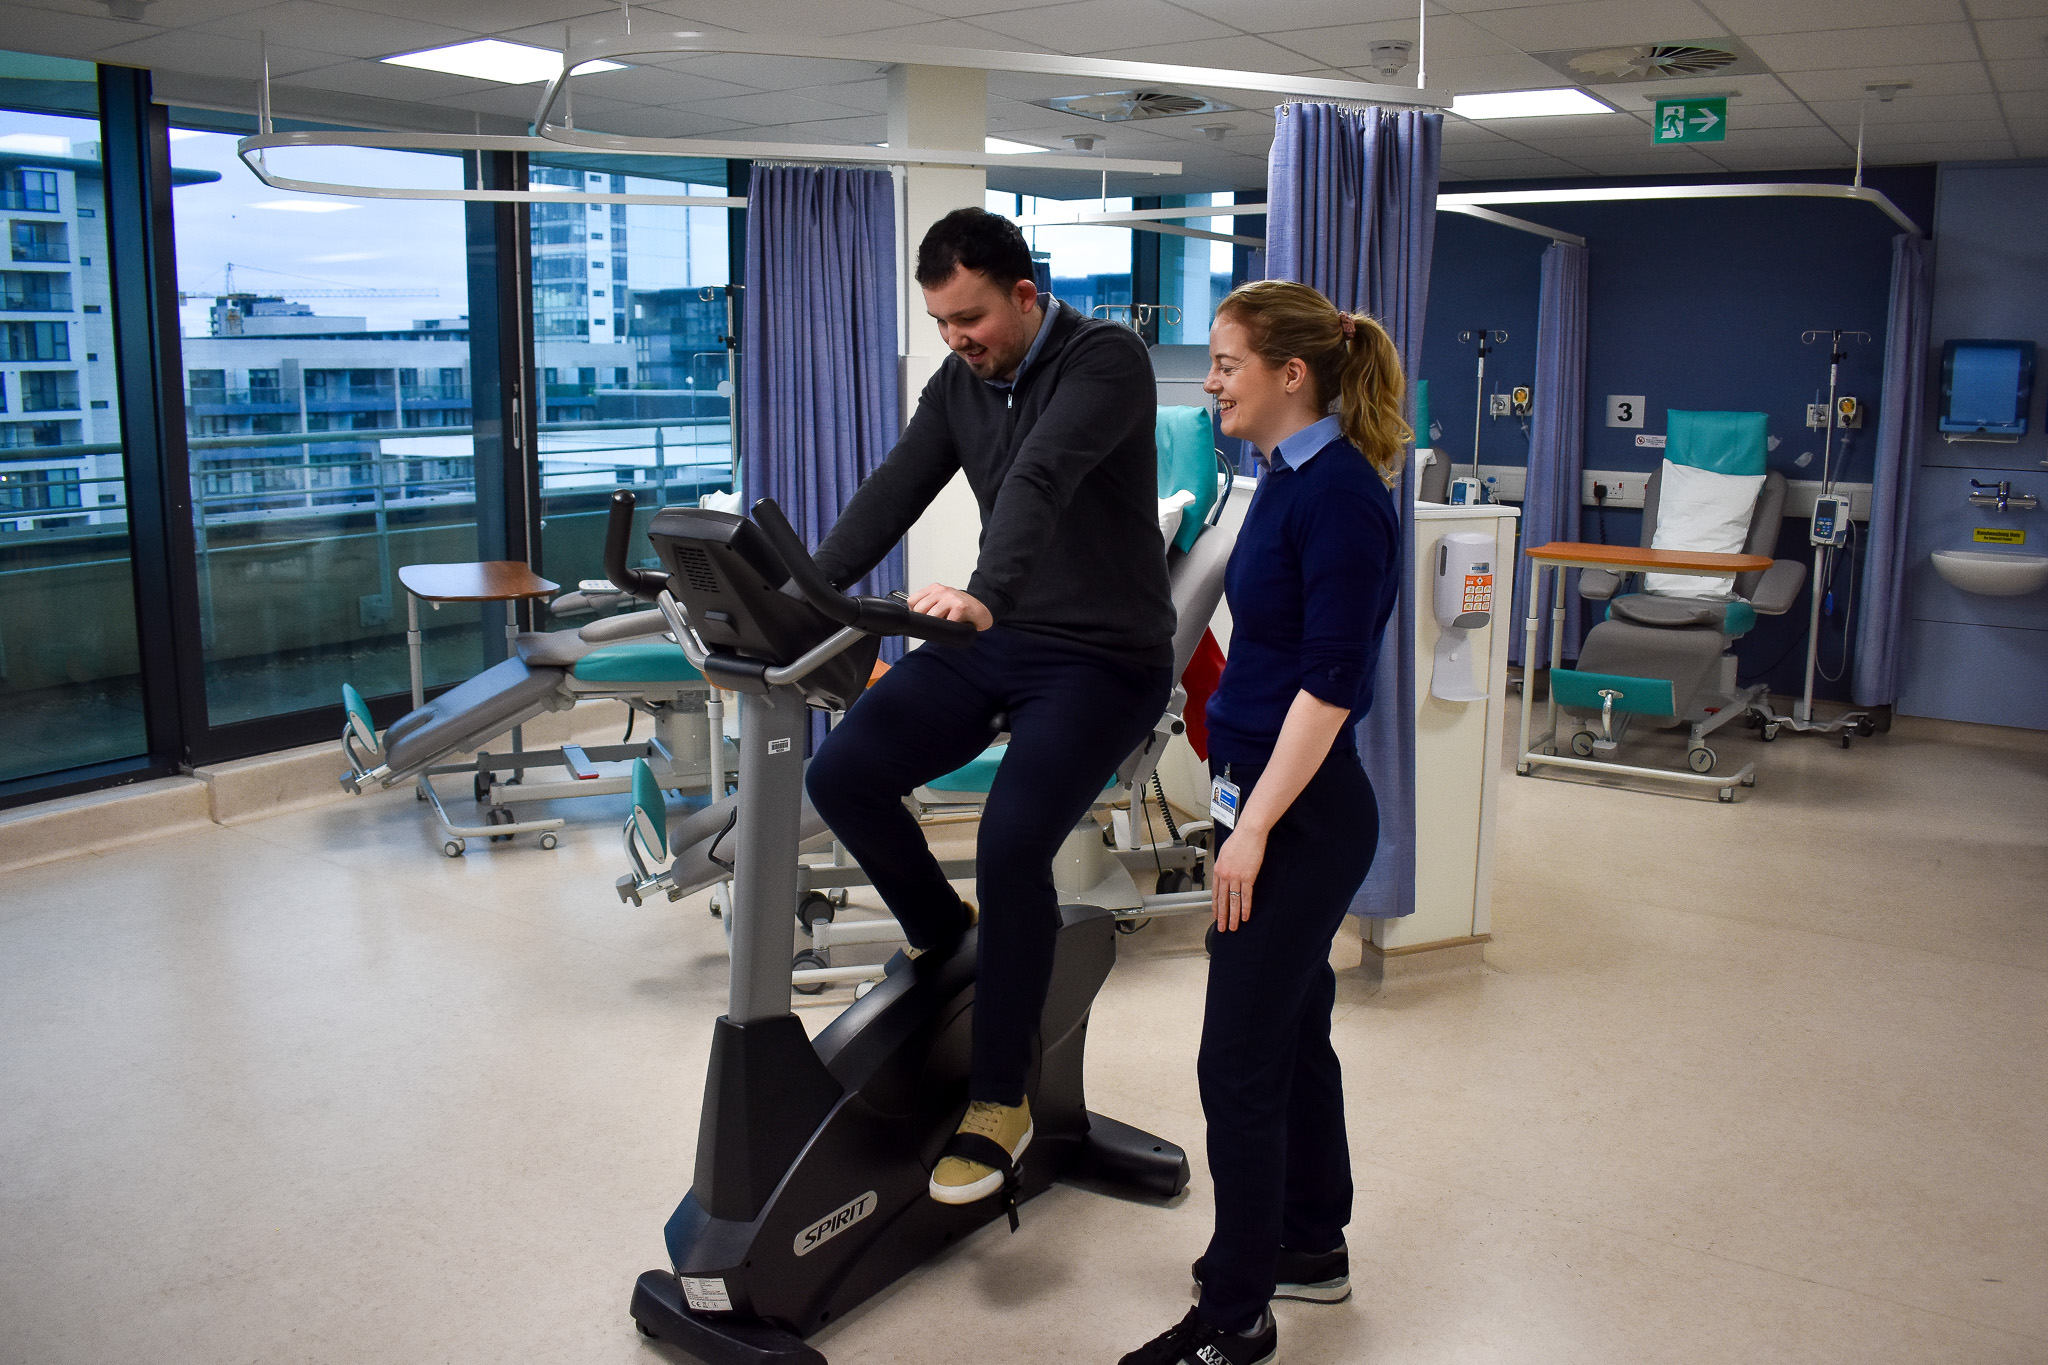 Exercise Bike for New Oncology EXERCISE INTERVENTION RESEARCH at Beacon Hospital